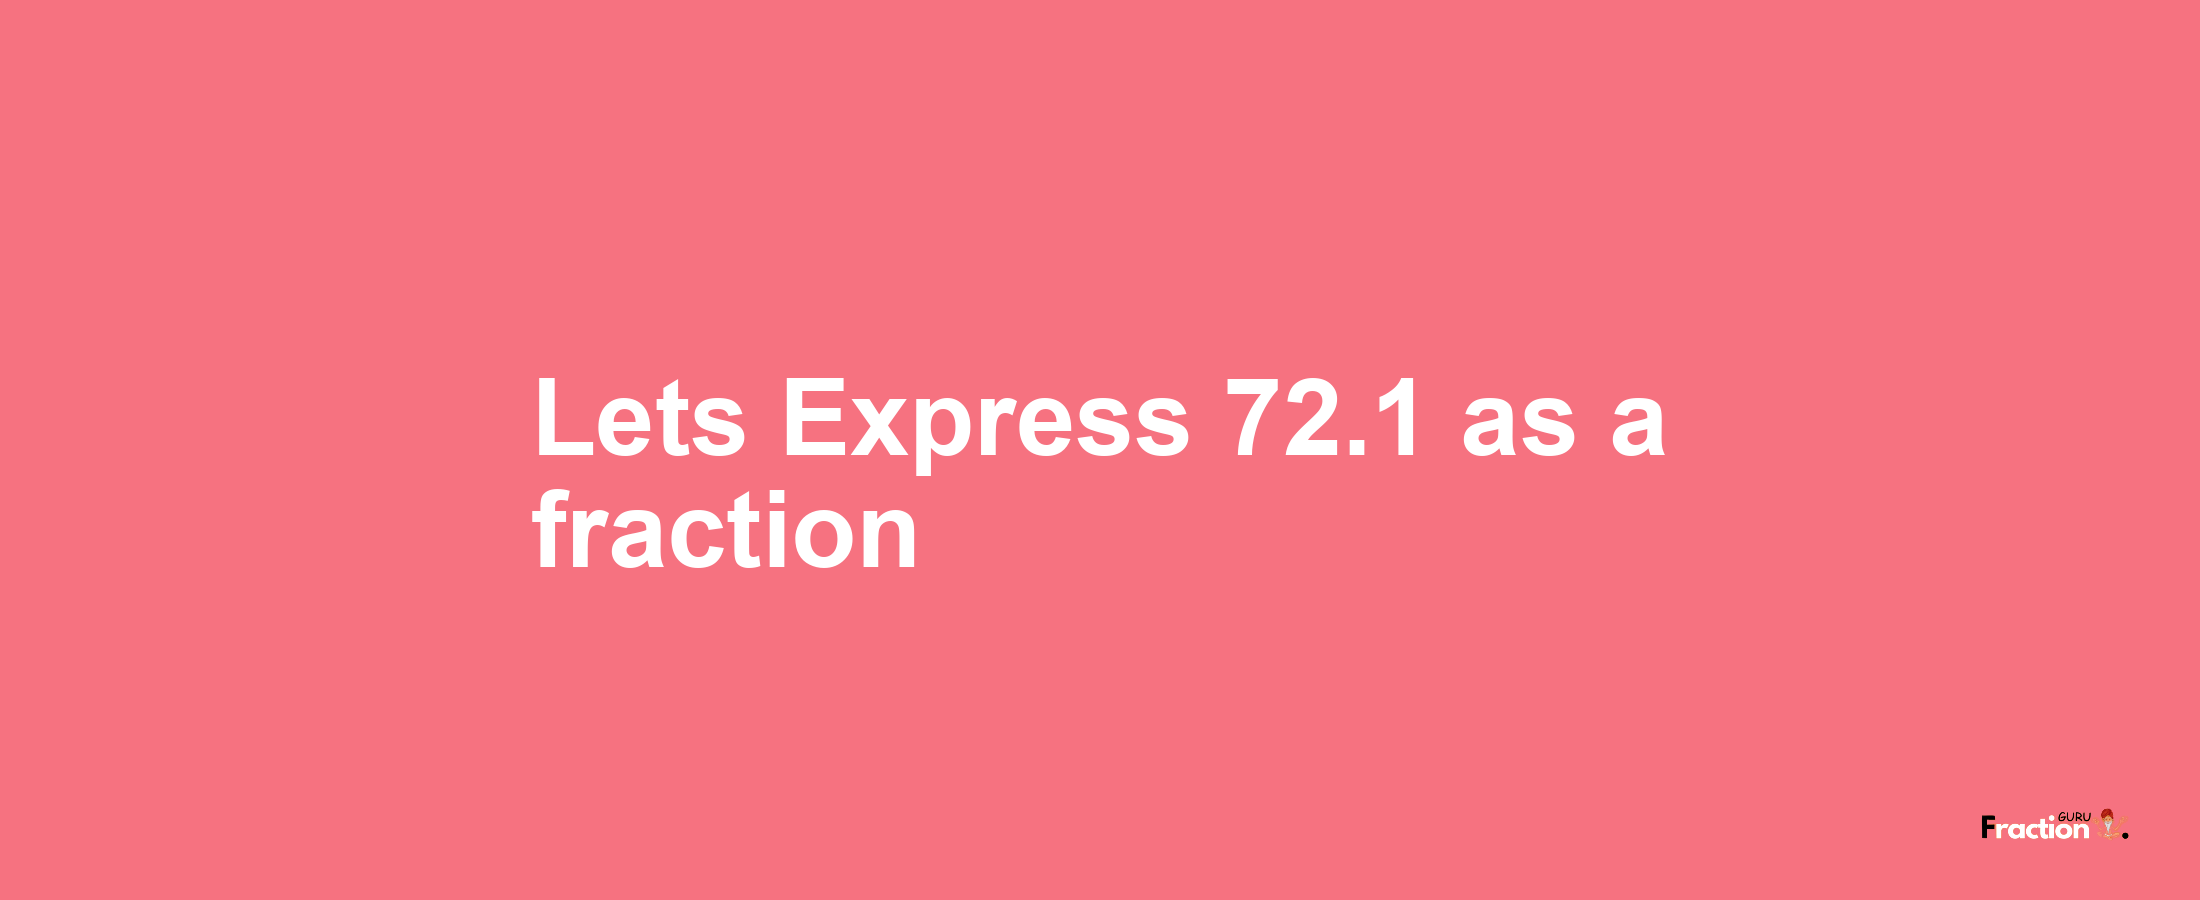 Lets Express 72.1 as afraction